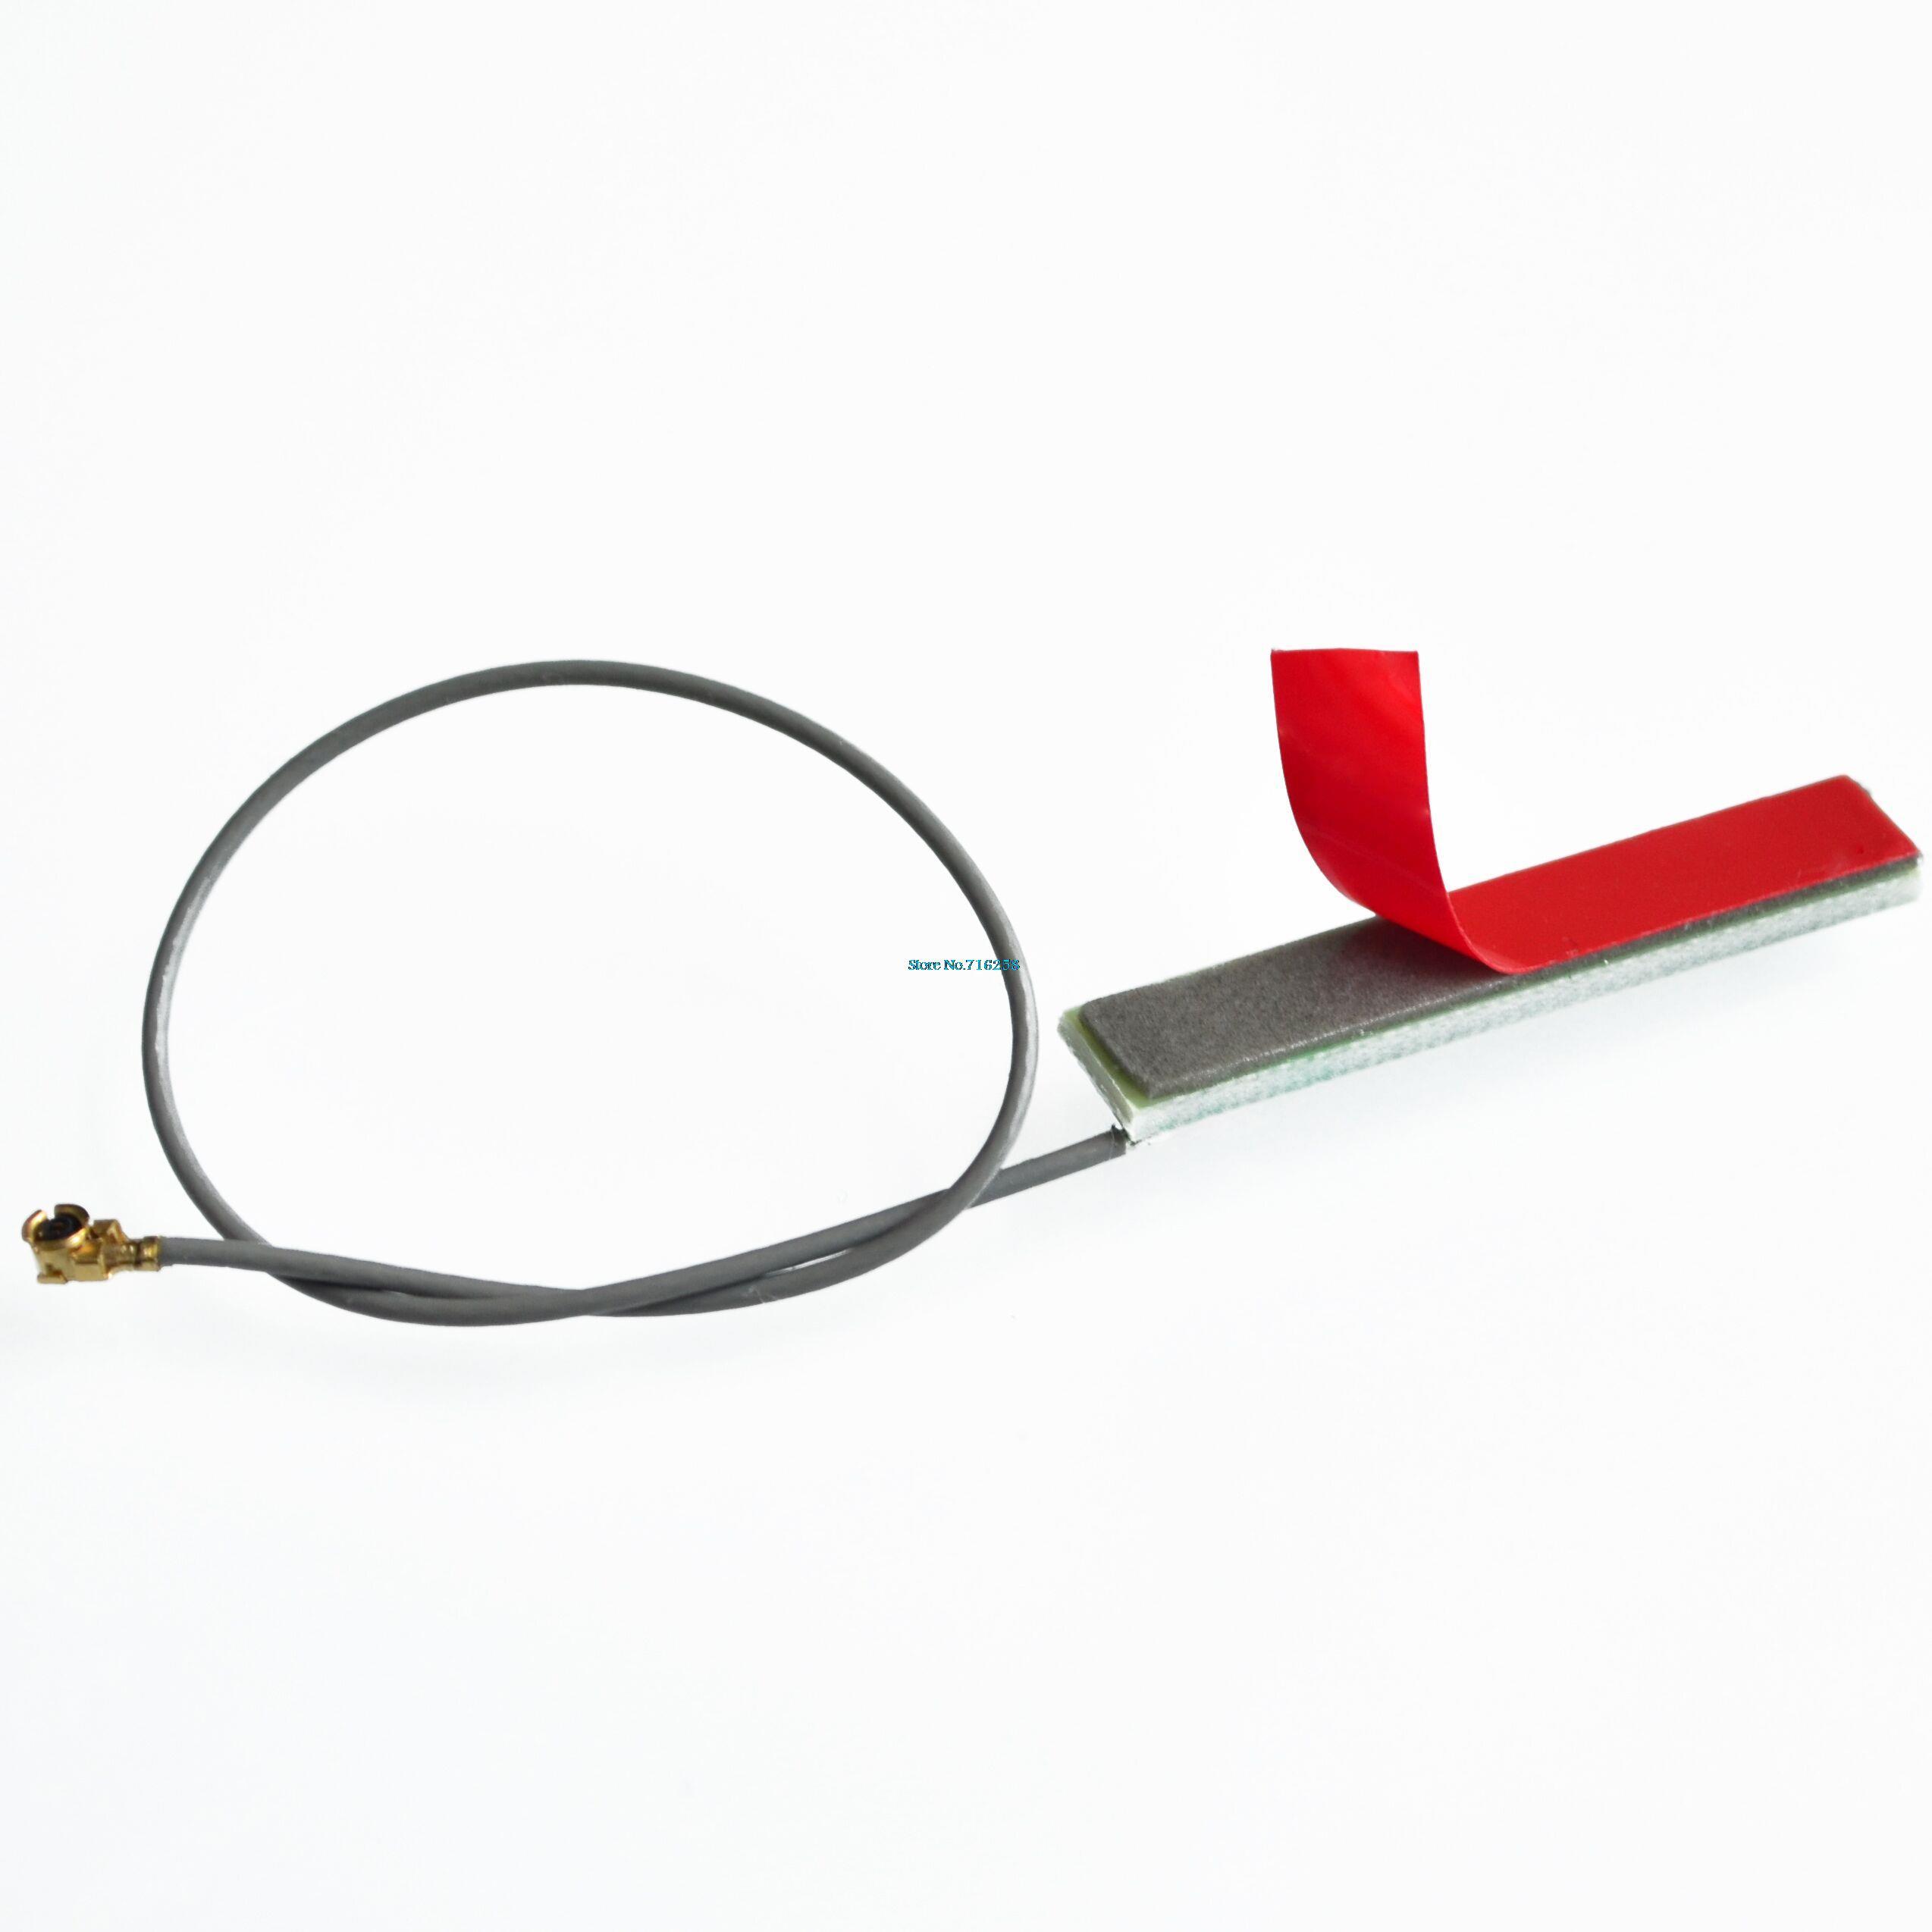 5pcs/lot GSM/GPRS/3G built in circuit board antenna 1.13 line 15cm long IPEX connector (3DBI) PCB small antenna